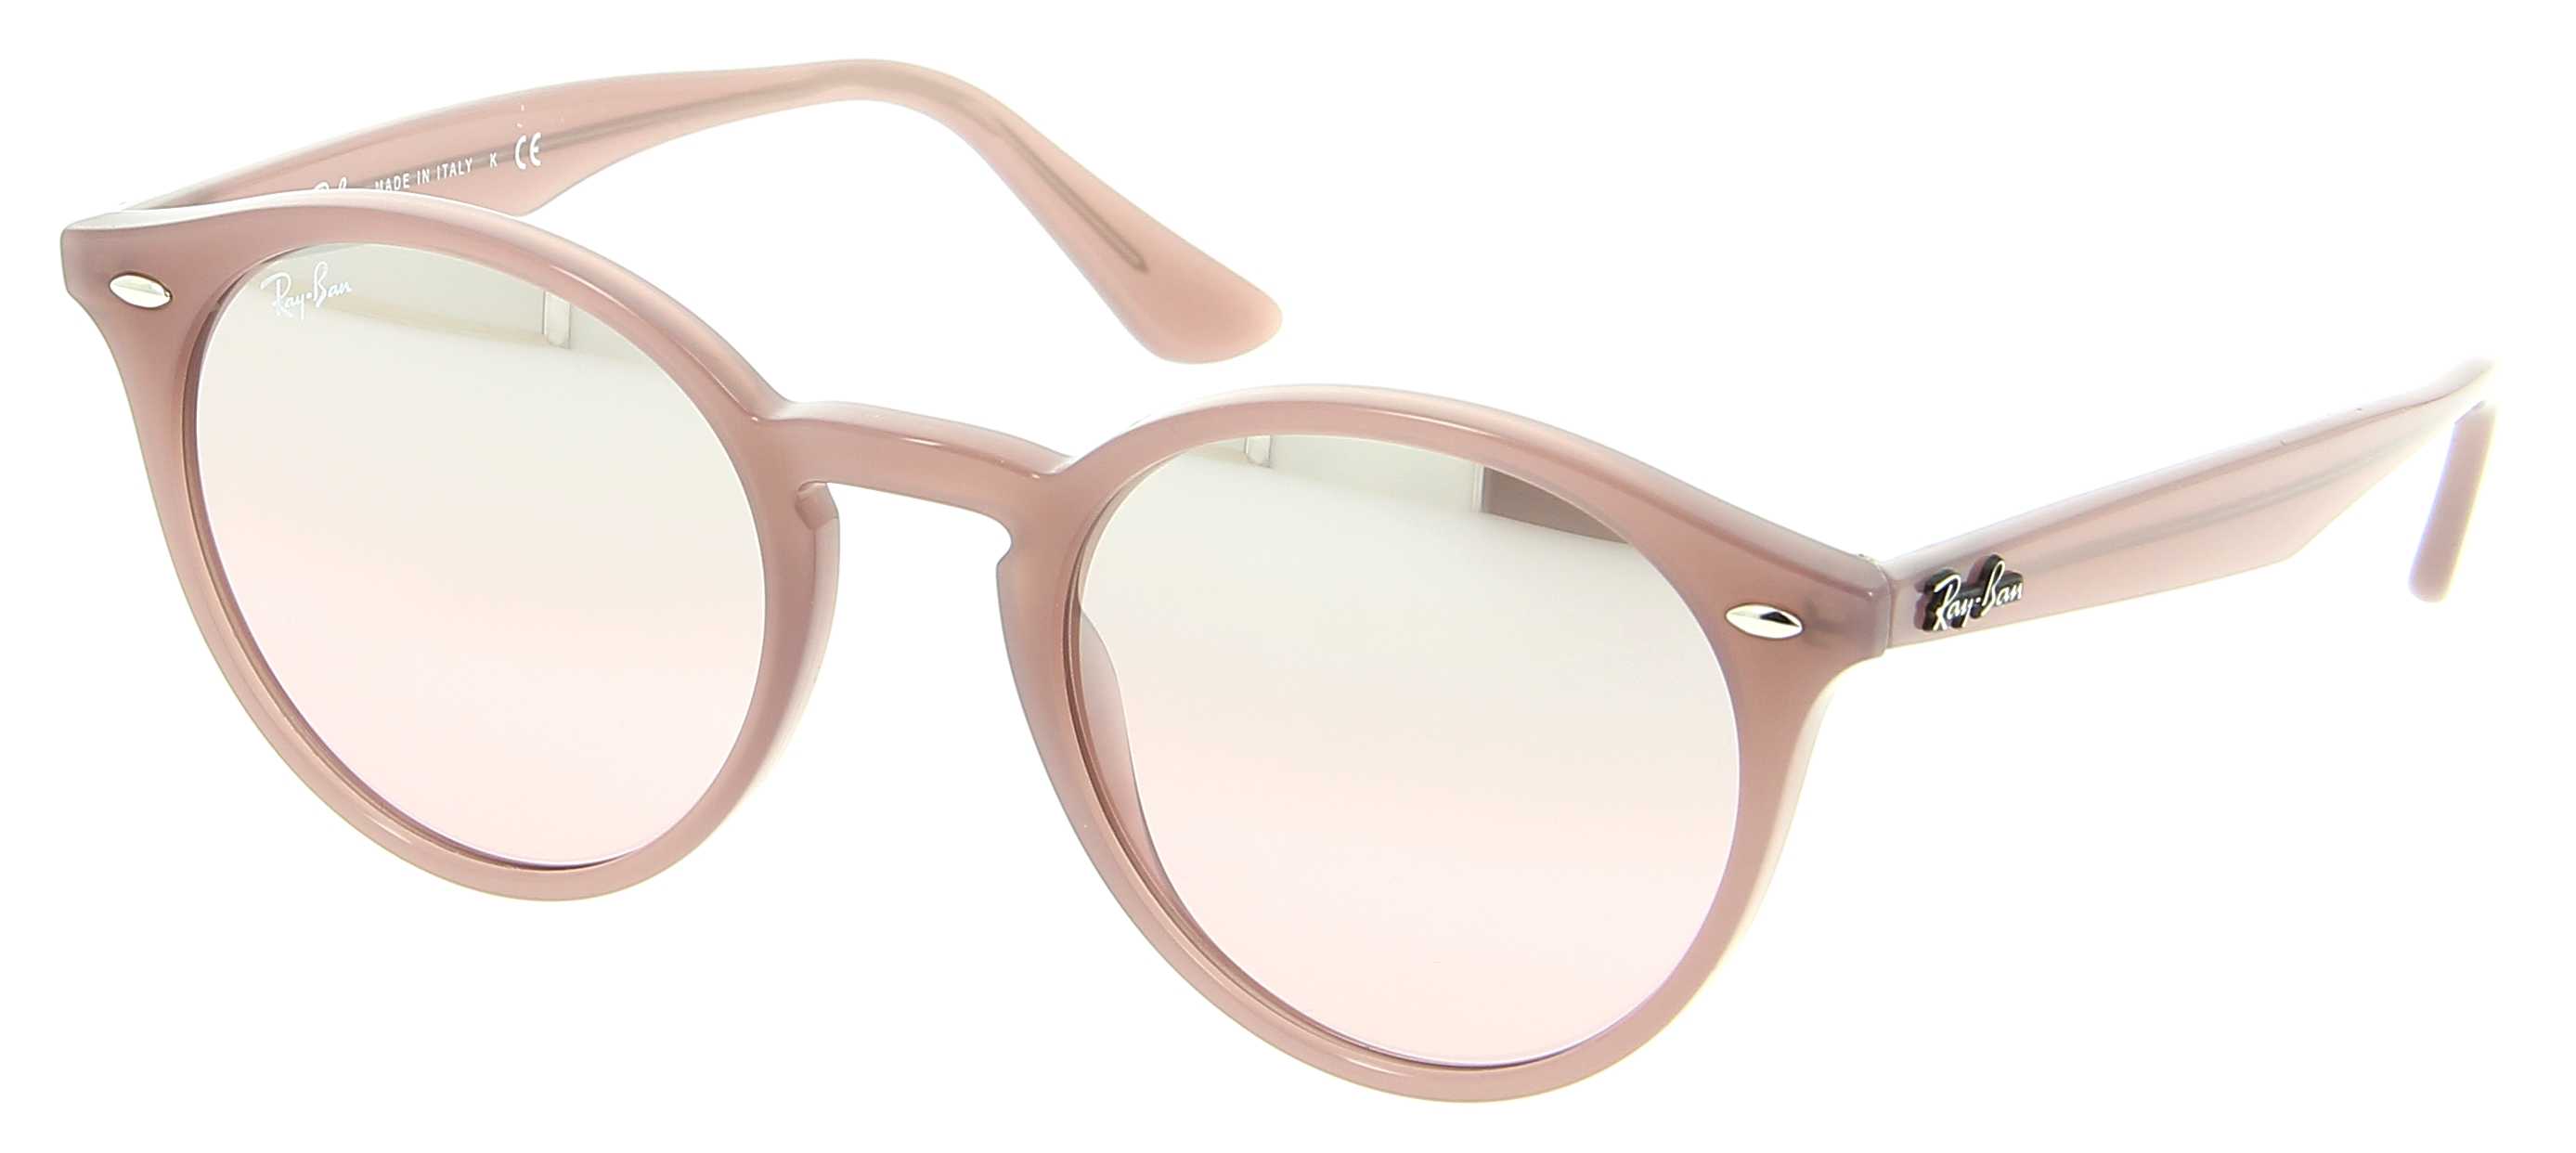 lunettes ray ban femme rb2180